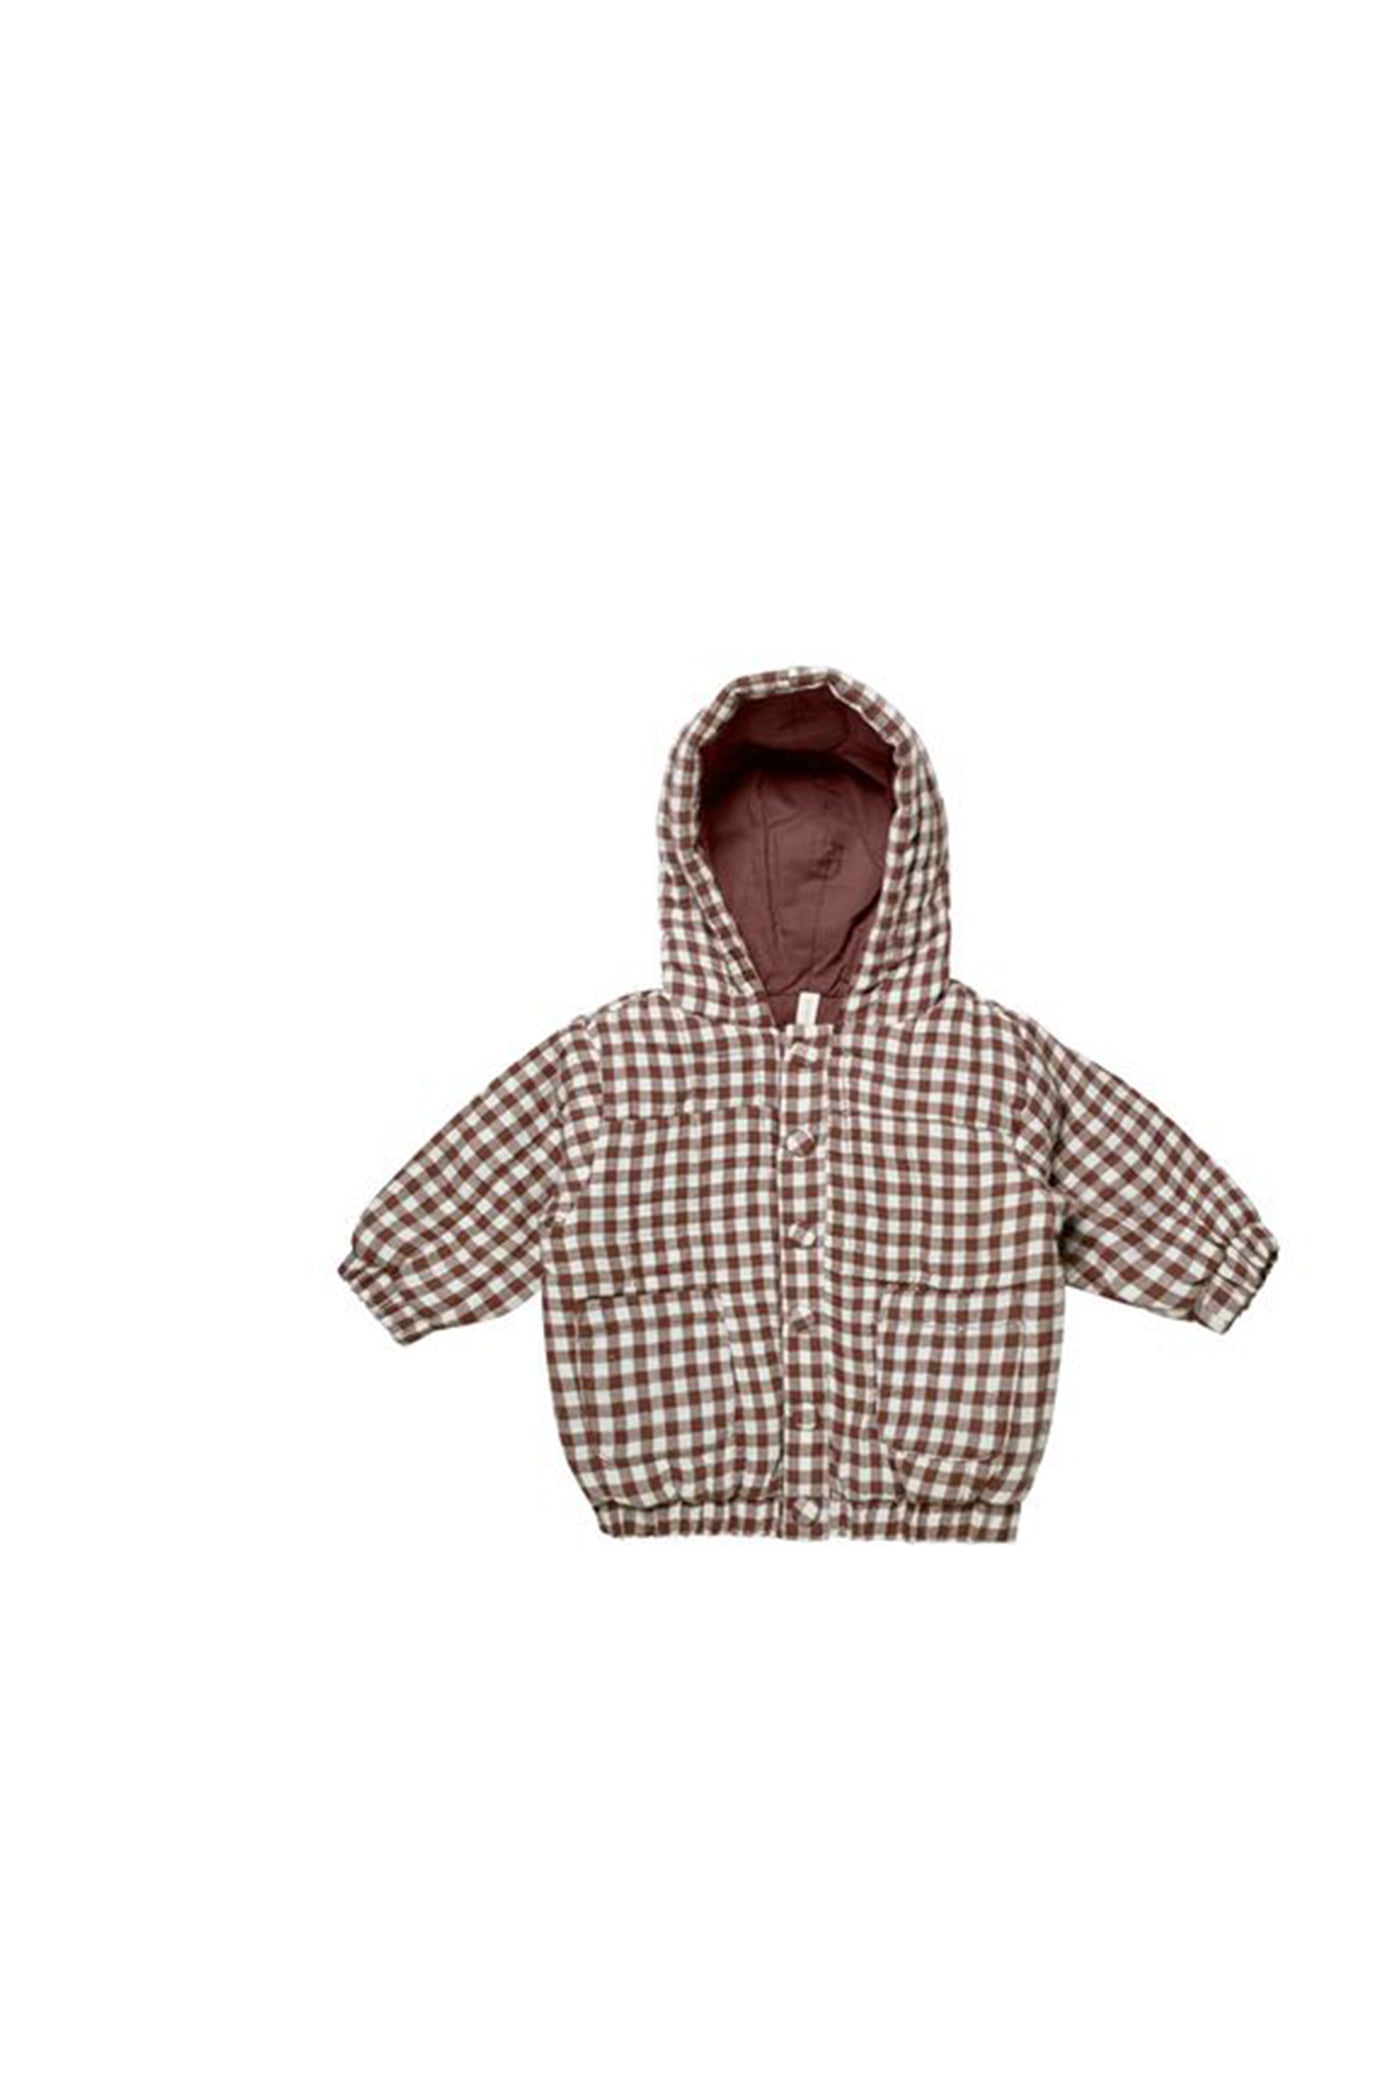 Hooded Woven Kids Jacket by Quincy Mae